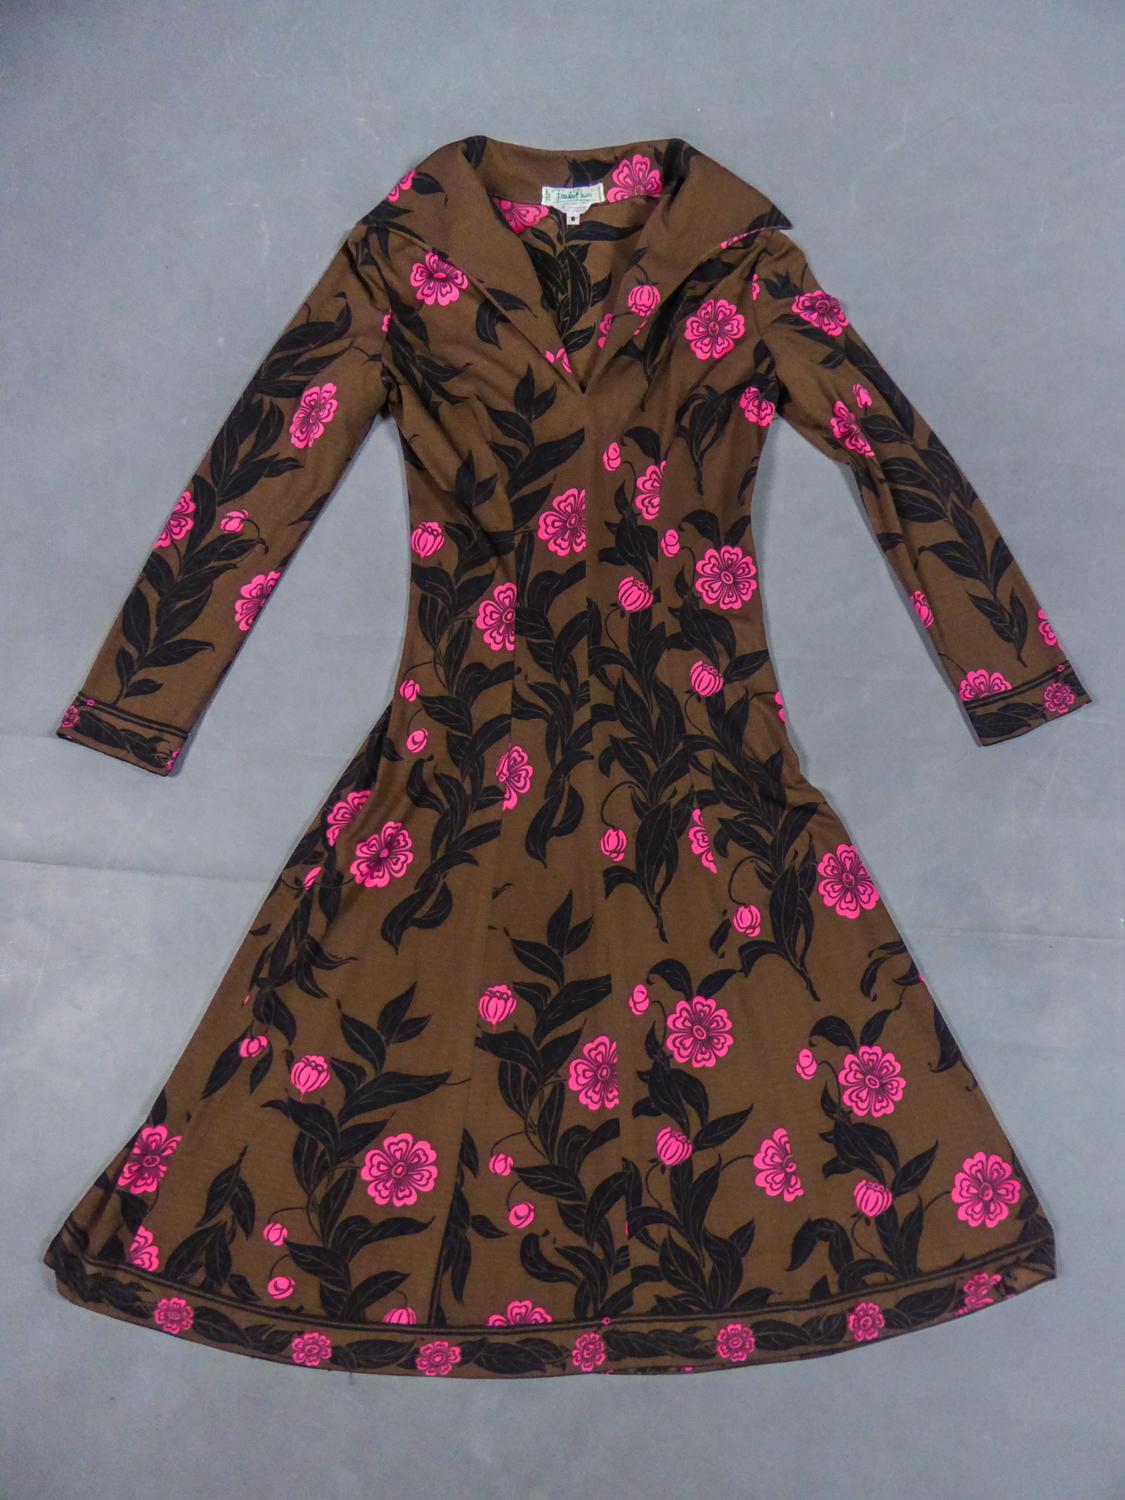 An Emilio Pucci Printed Jersey Dress Circa 1975 For Sale 8